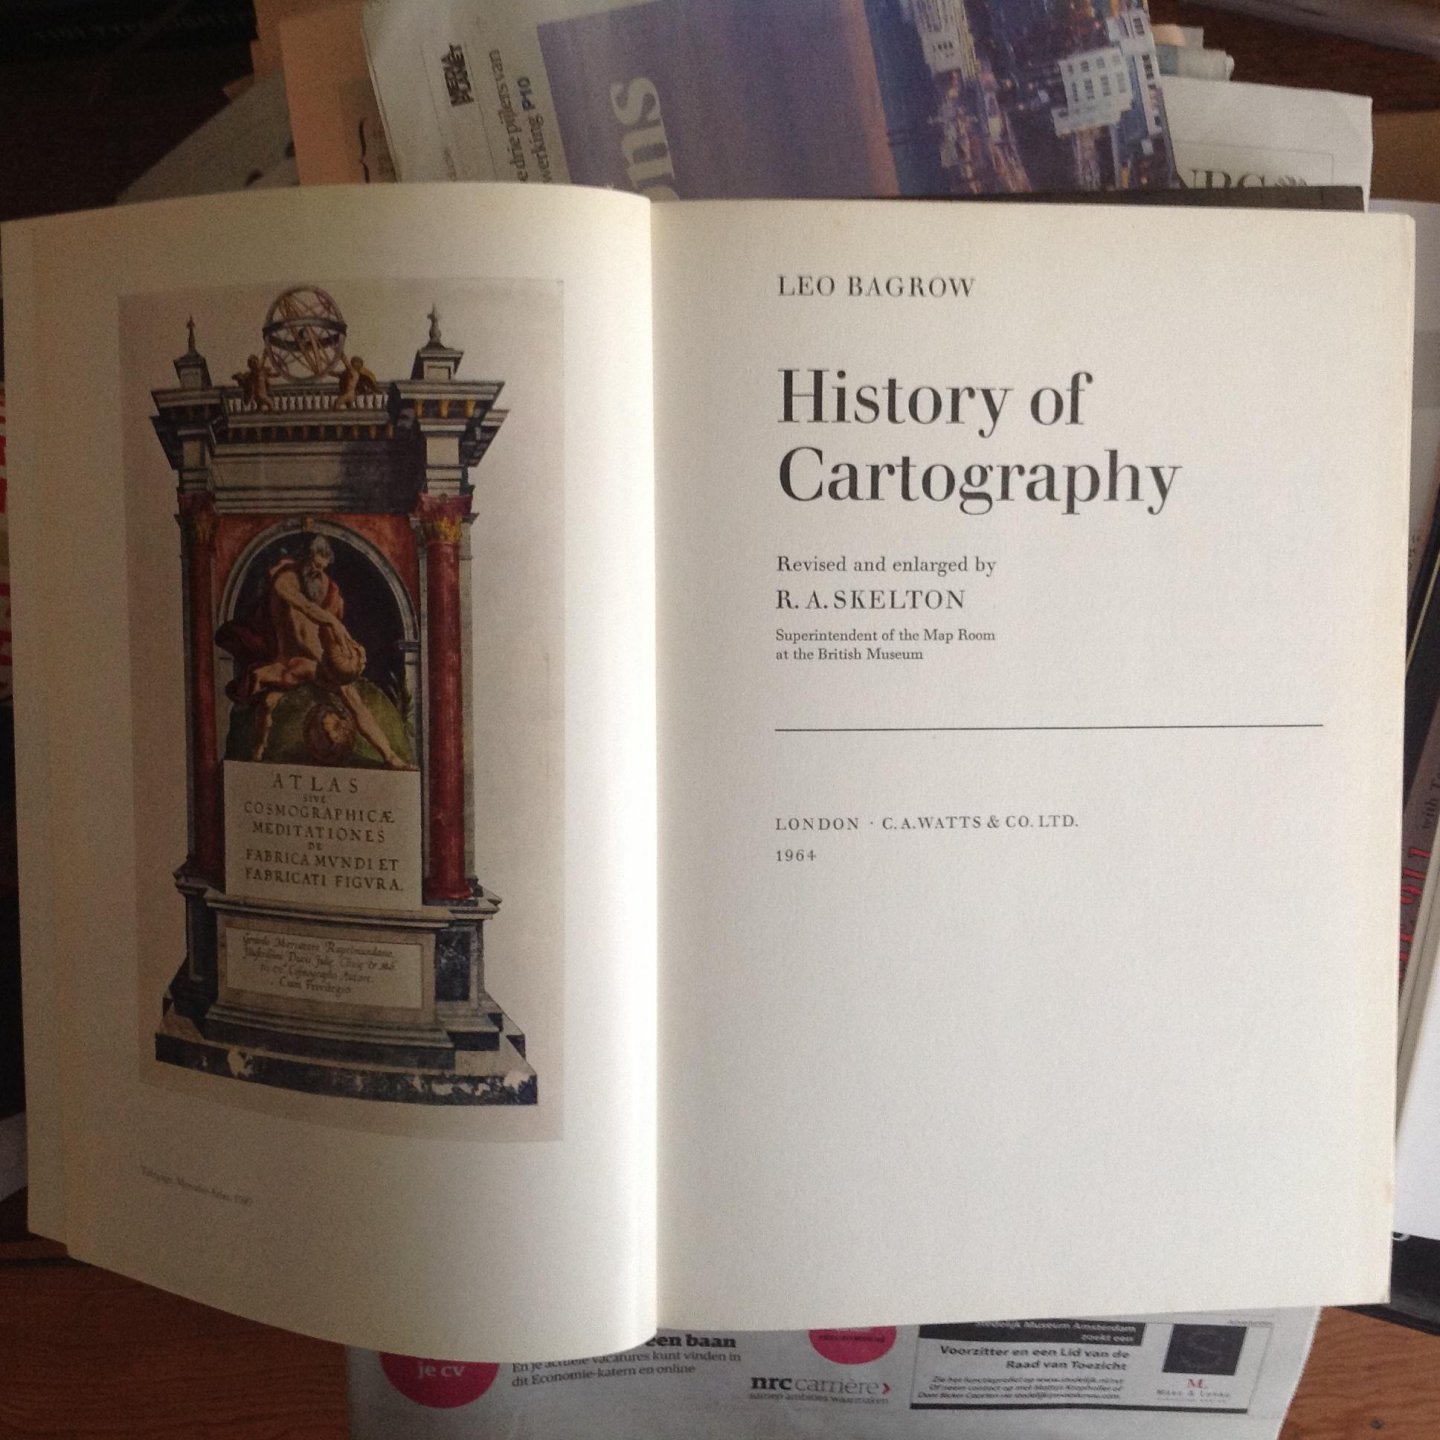 Bagrow, Leo - History of Cartography Revised and enlarged by R.A.Skelton